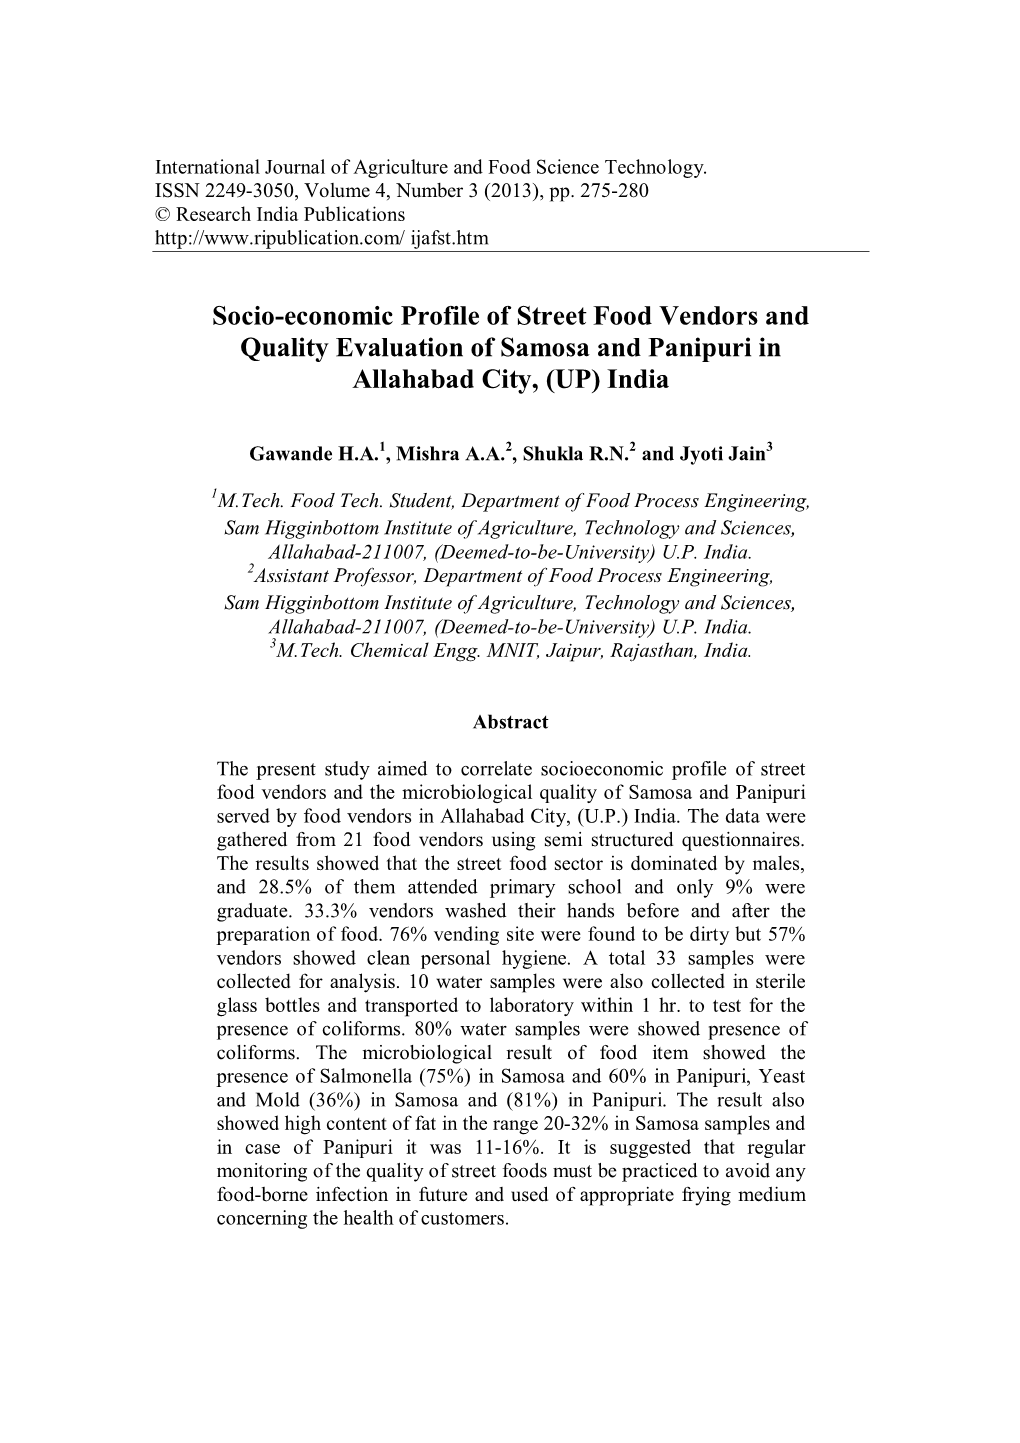 Socio-Economic Profile of Street Food Vendors and Quality Evaluation of Samosa and Panipuri in Allahabad City, (UP) India